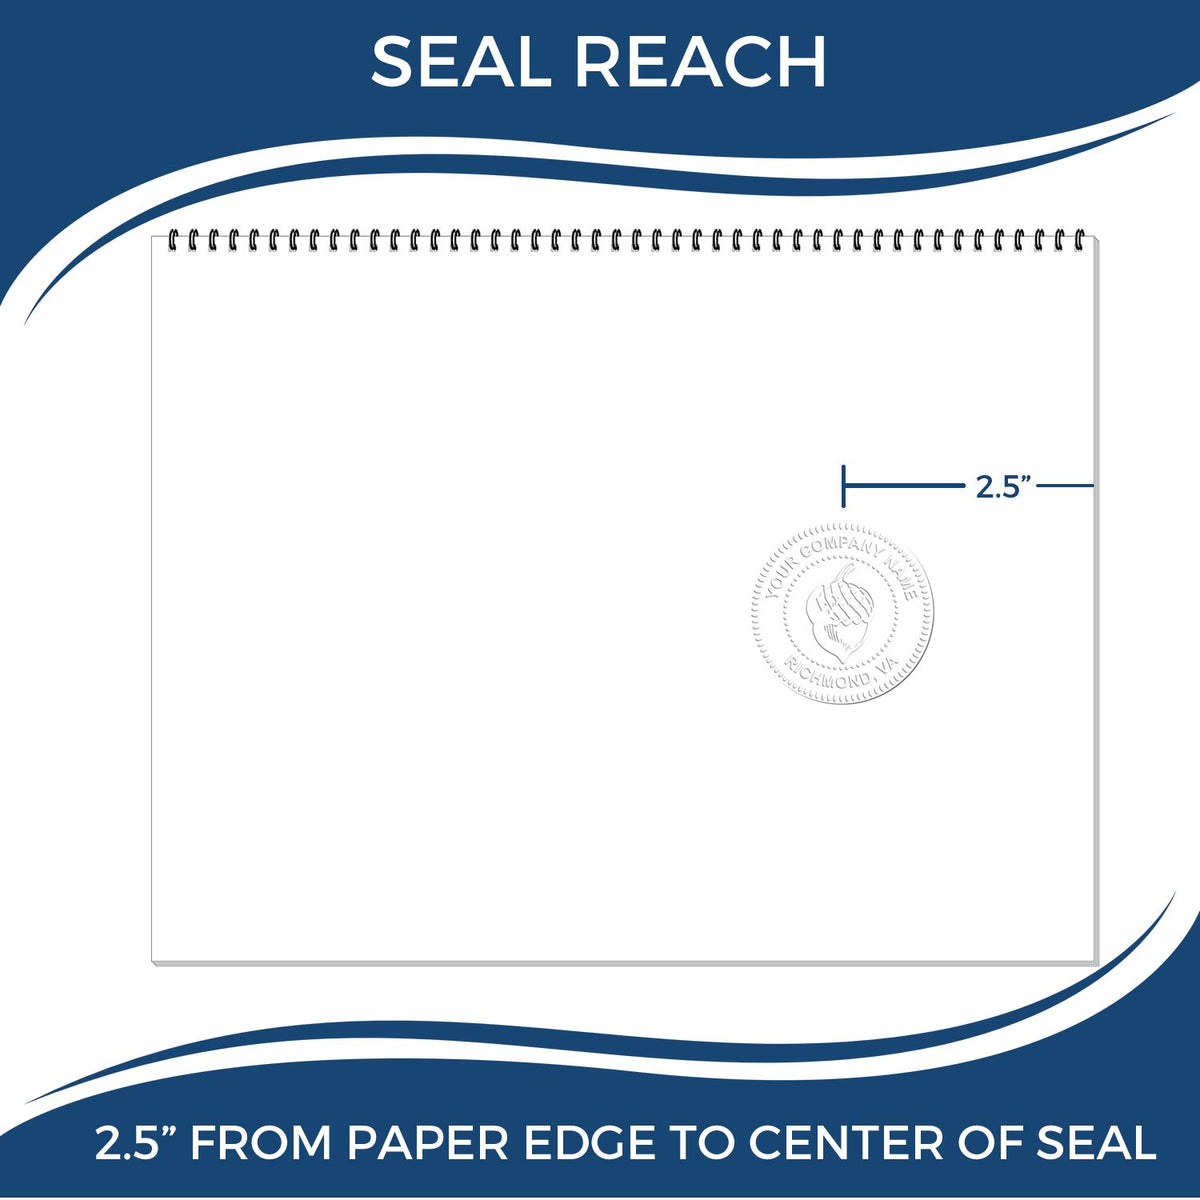 An infographic showing the seal reach which is represented by a ruler and a miniature seal image of the Heavy Duty Cast Iron Missouri Architect Embosser